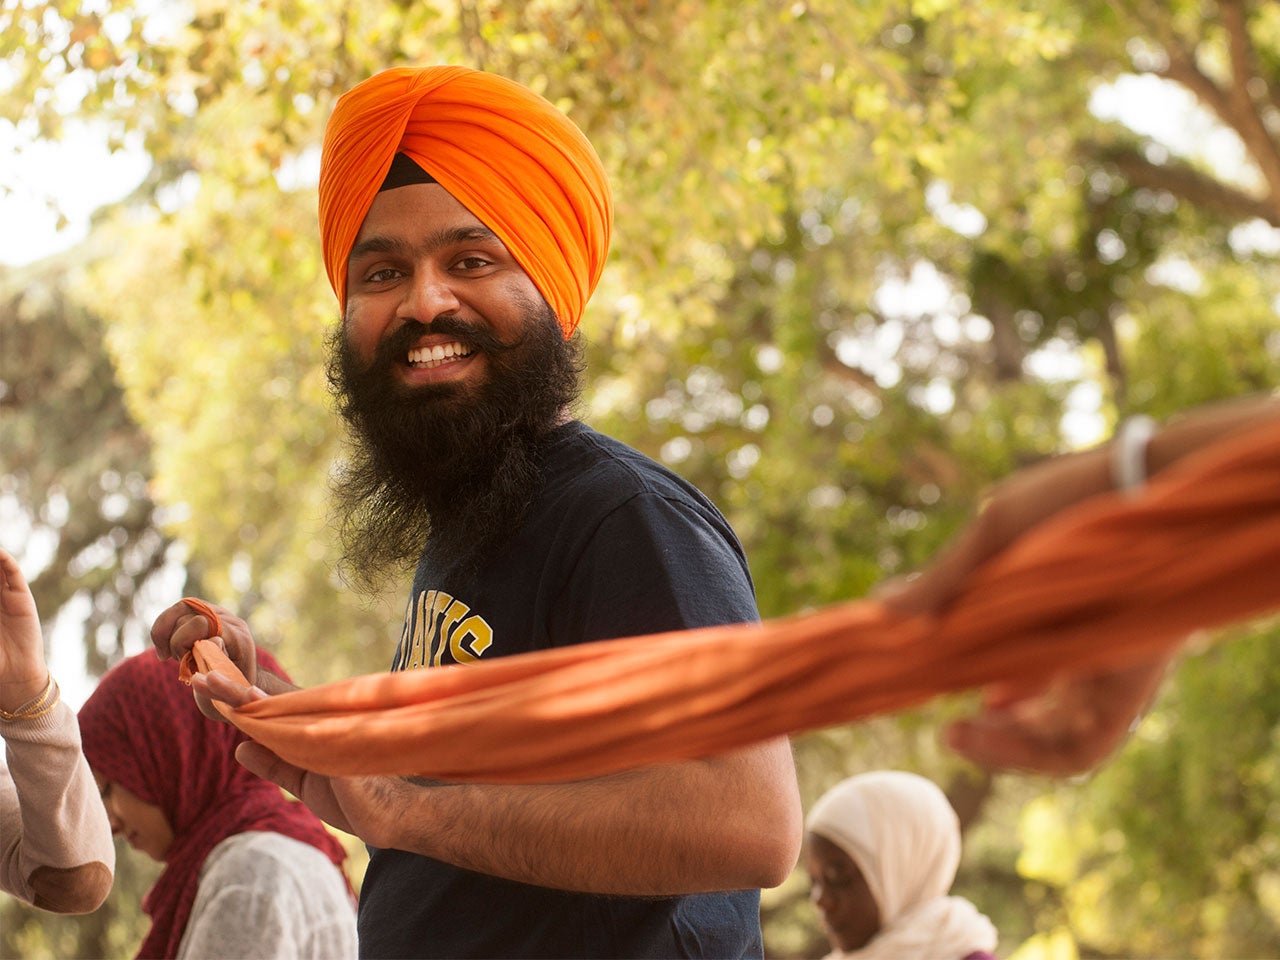 A UC Davis student smiles at the camera while stretching orange fabric.